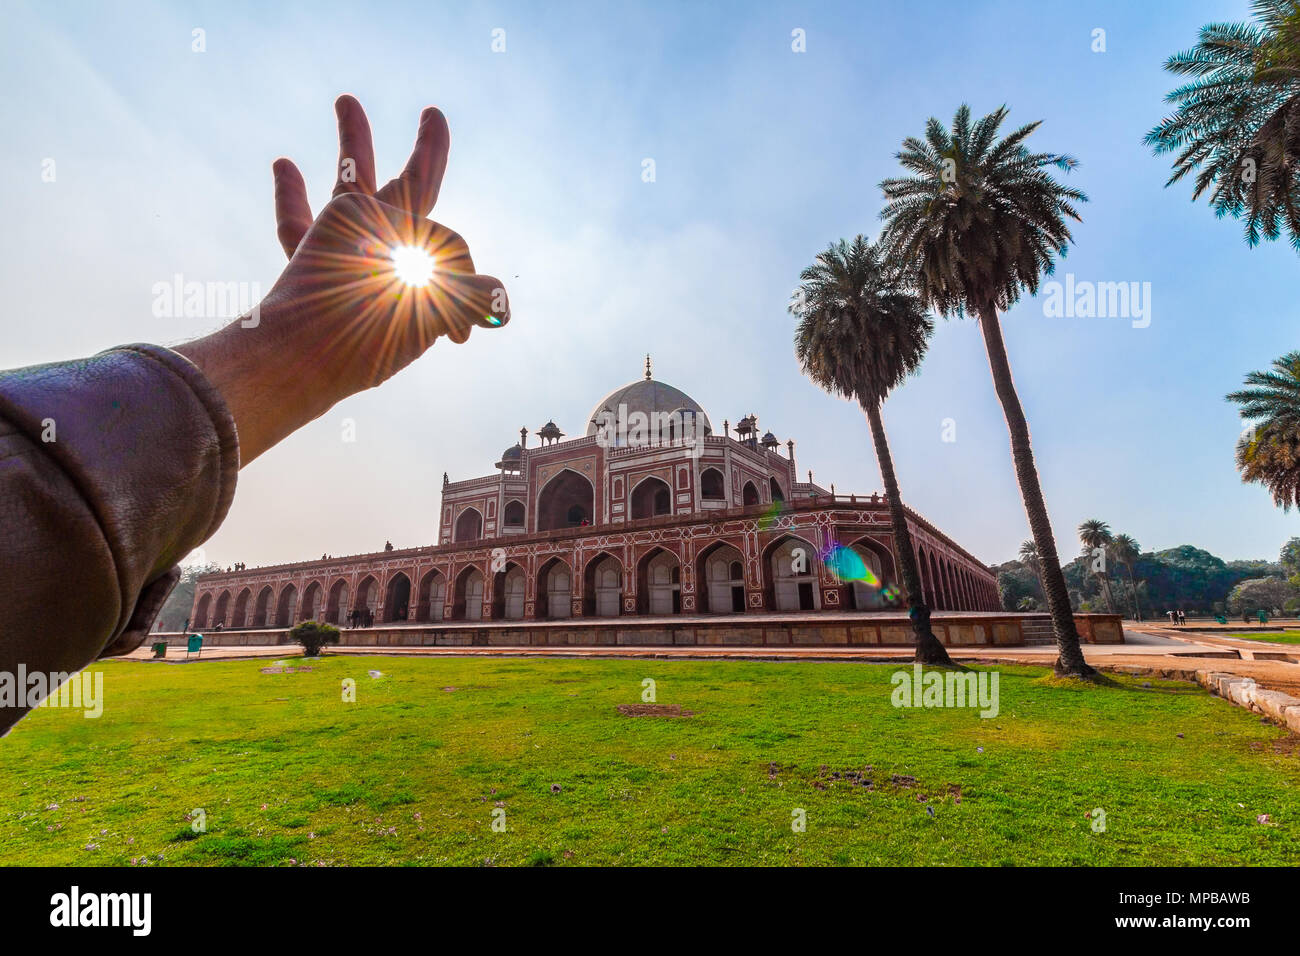 Panoramic views of the first garden-tomb on the Indian subcontinent. The Humayun's Tomb is an excellent example of Persian architecture. Stock Photo